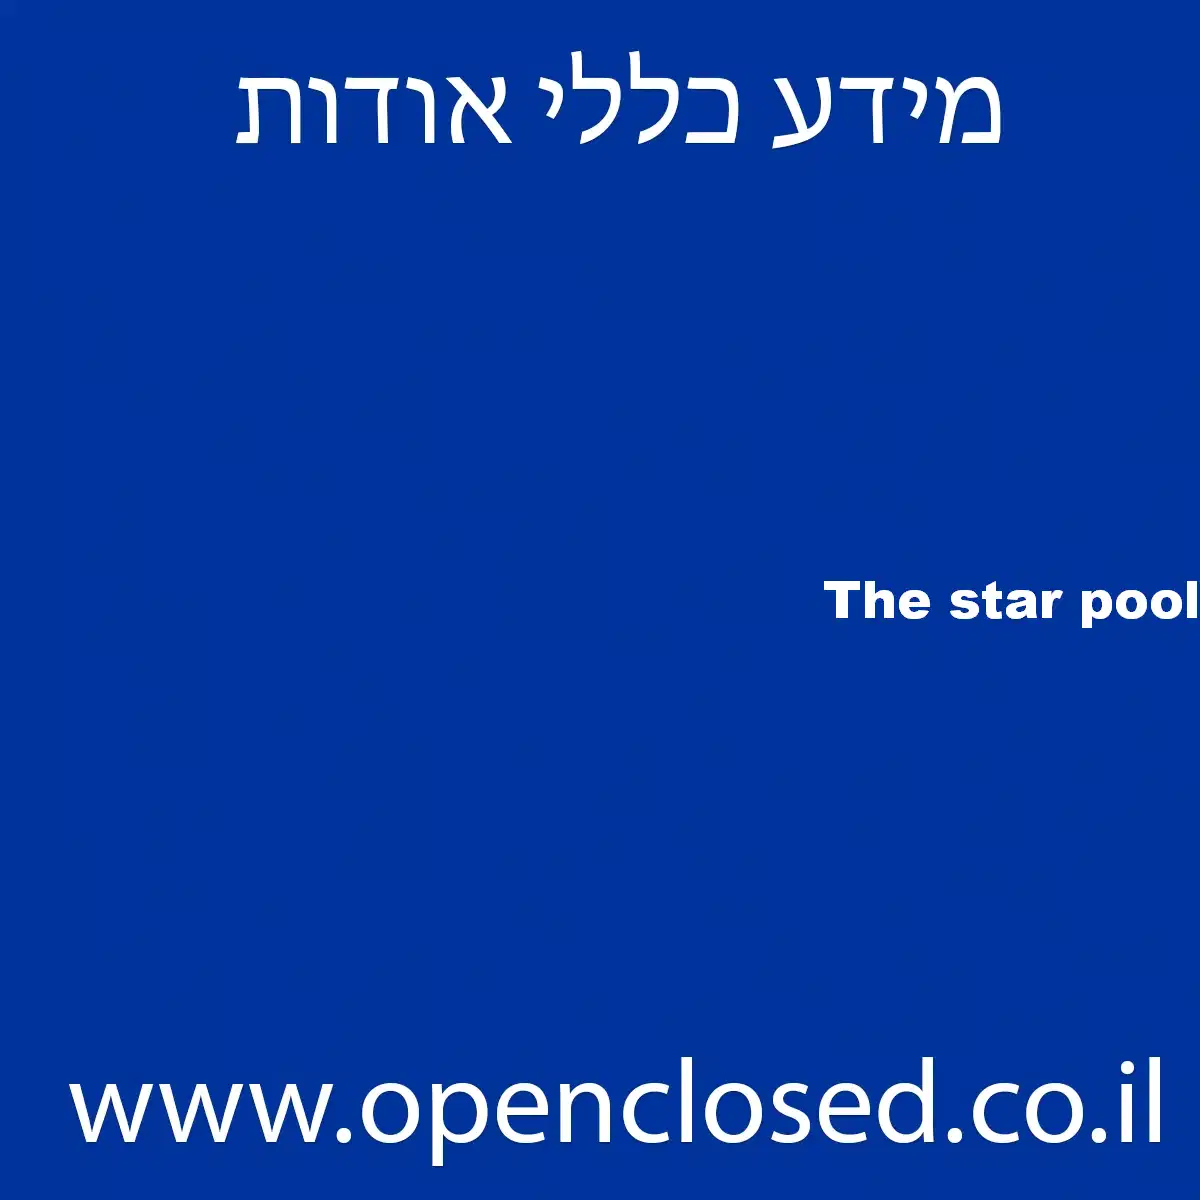 The star pool